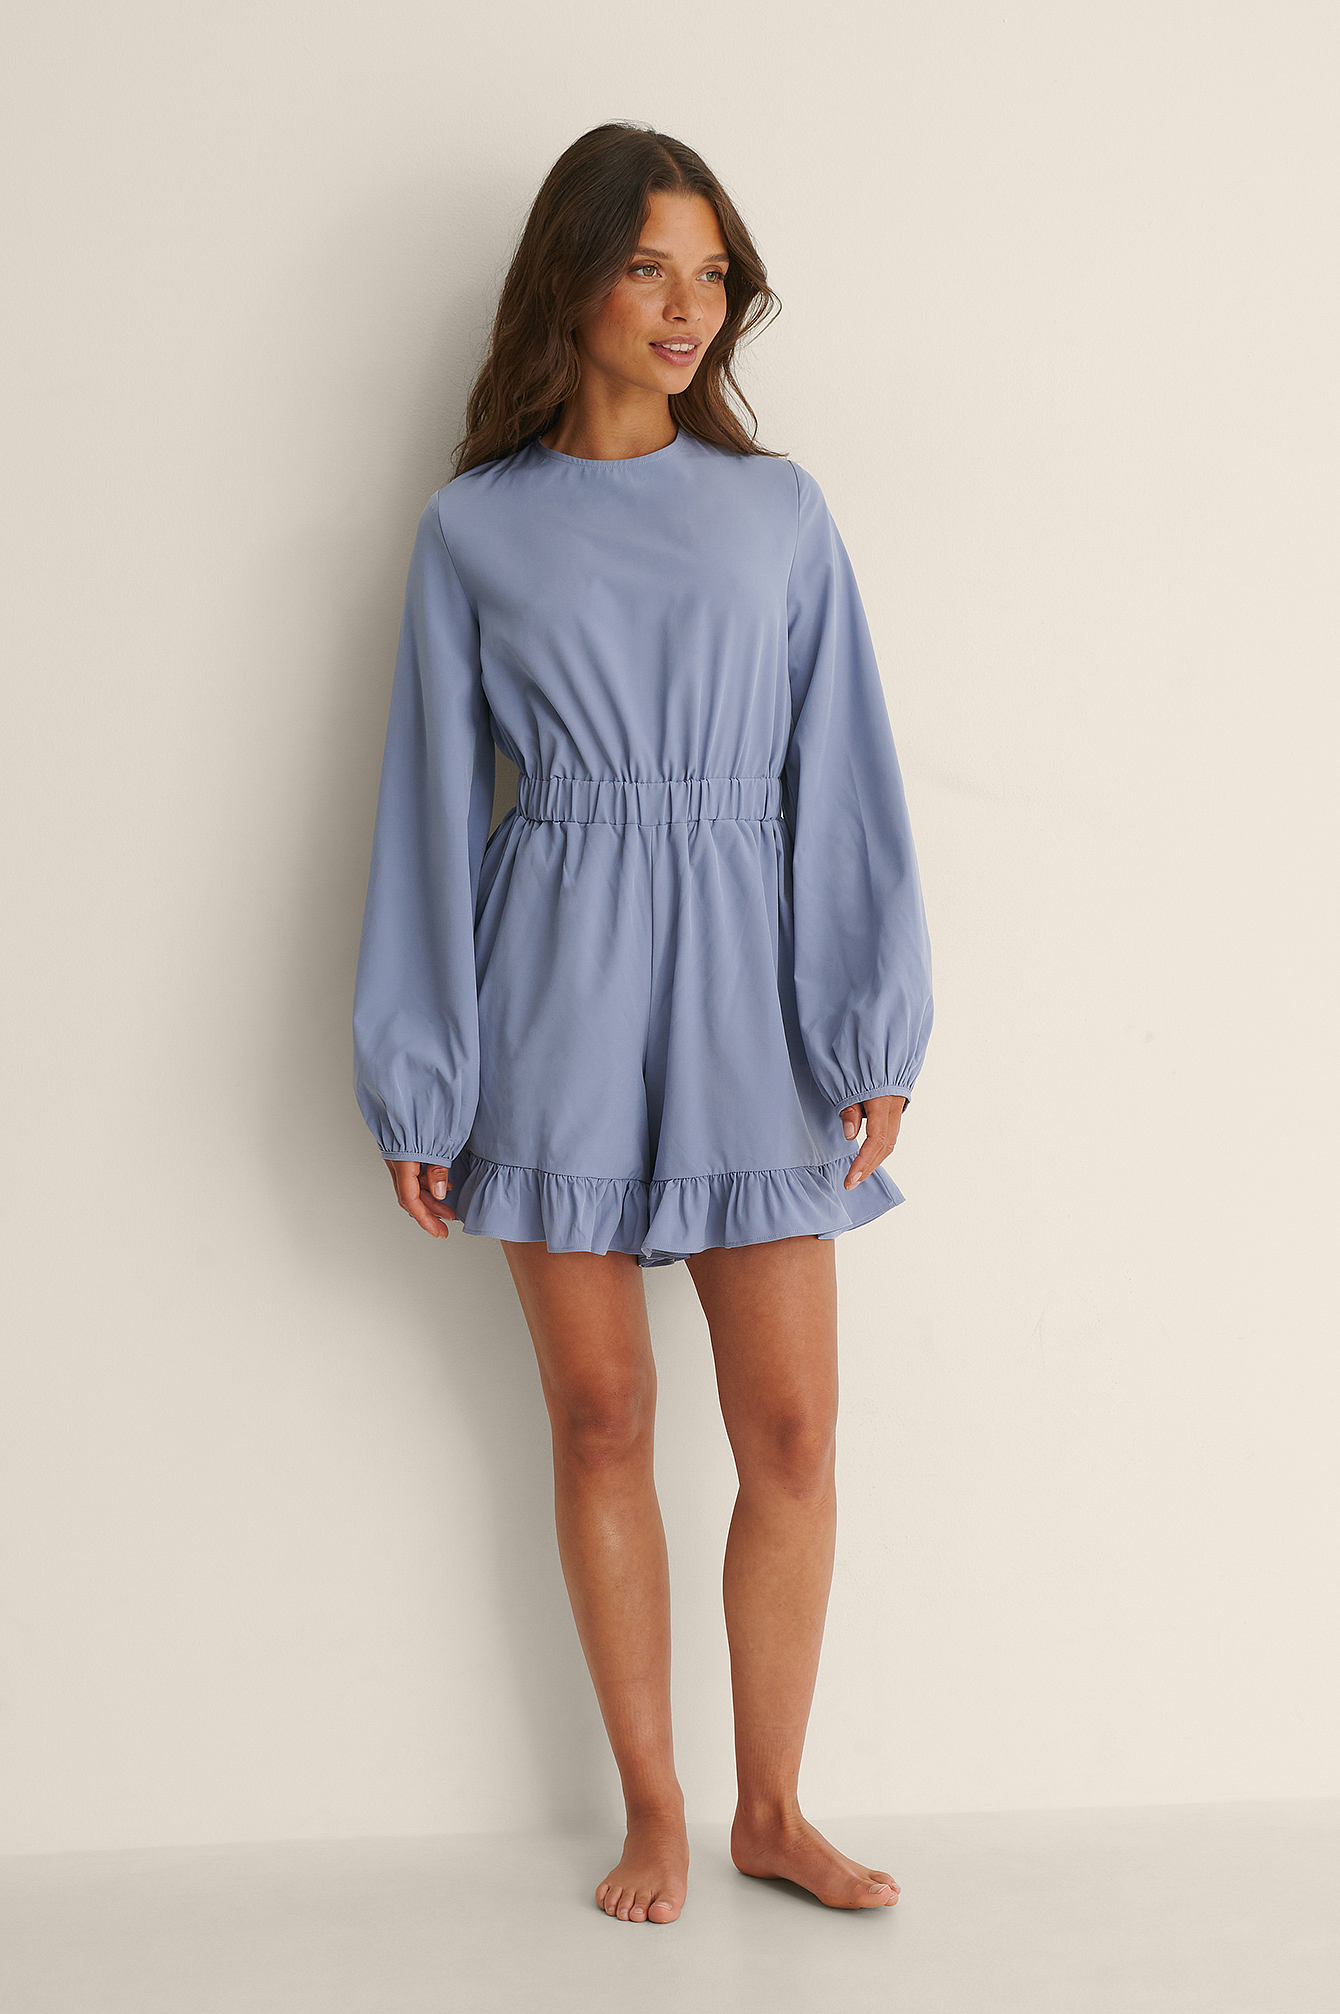 Long Sleeve Frilled Playsuit Outfit.